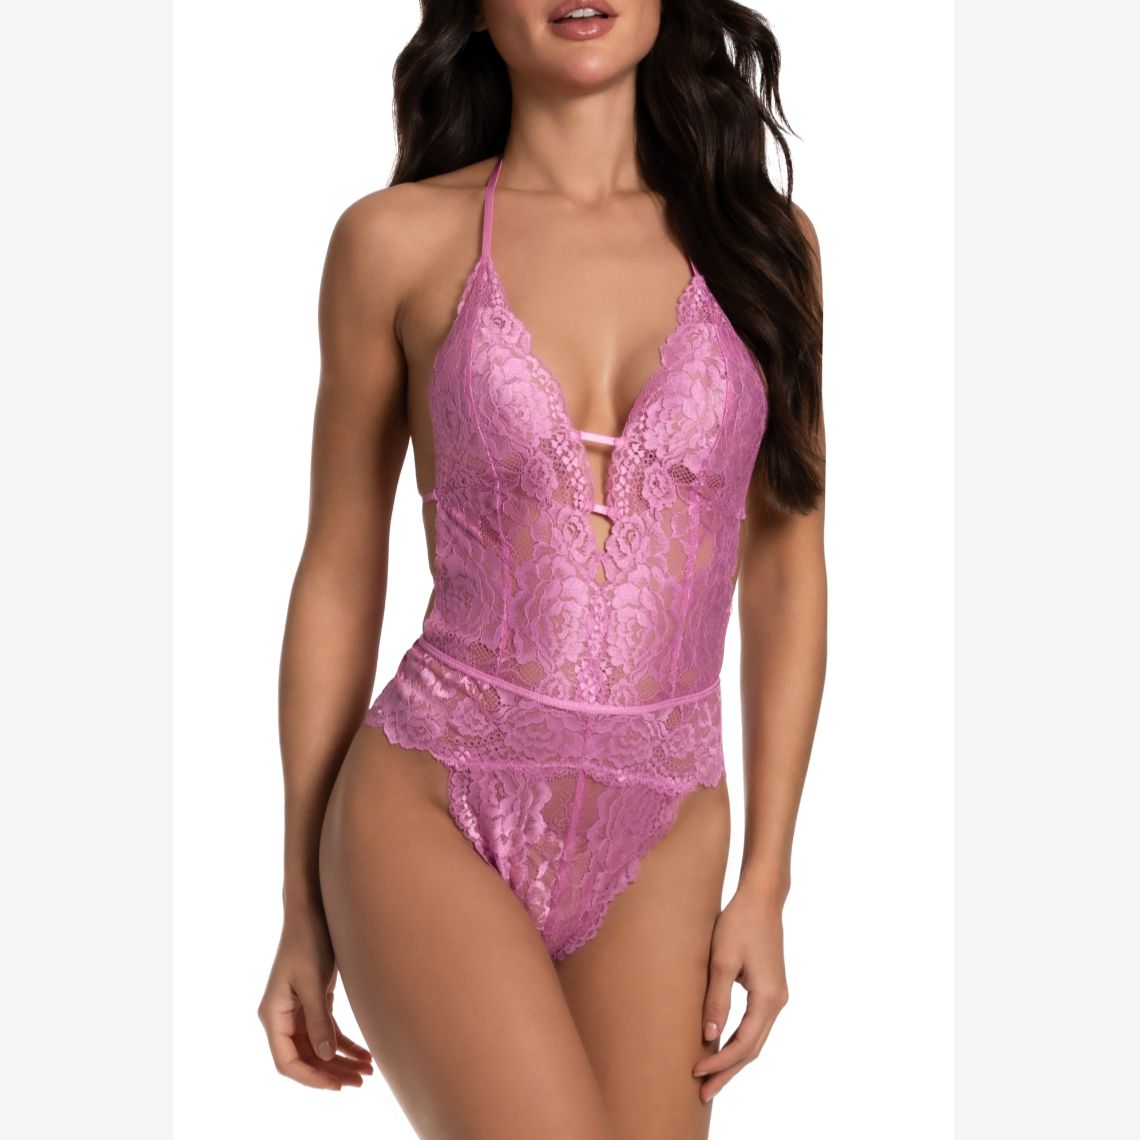 Jonquil Juliet Teddy JUE097 in Orchid-Bodysuit-Jonquil in Bloom-Orchid-XSmall-Anna Bella Fine Lingerie, Reveal Your Most Gorgeous Self!